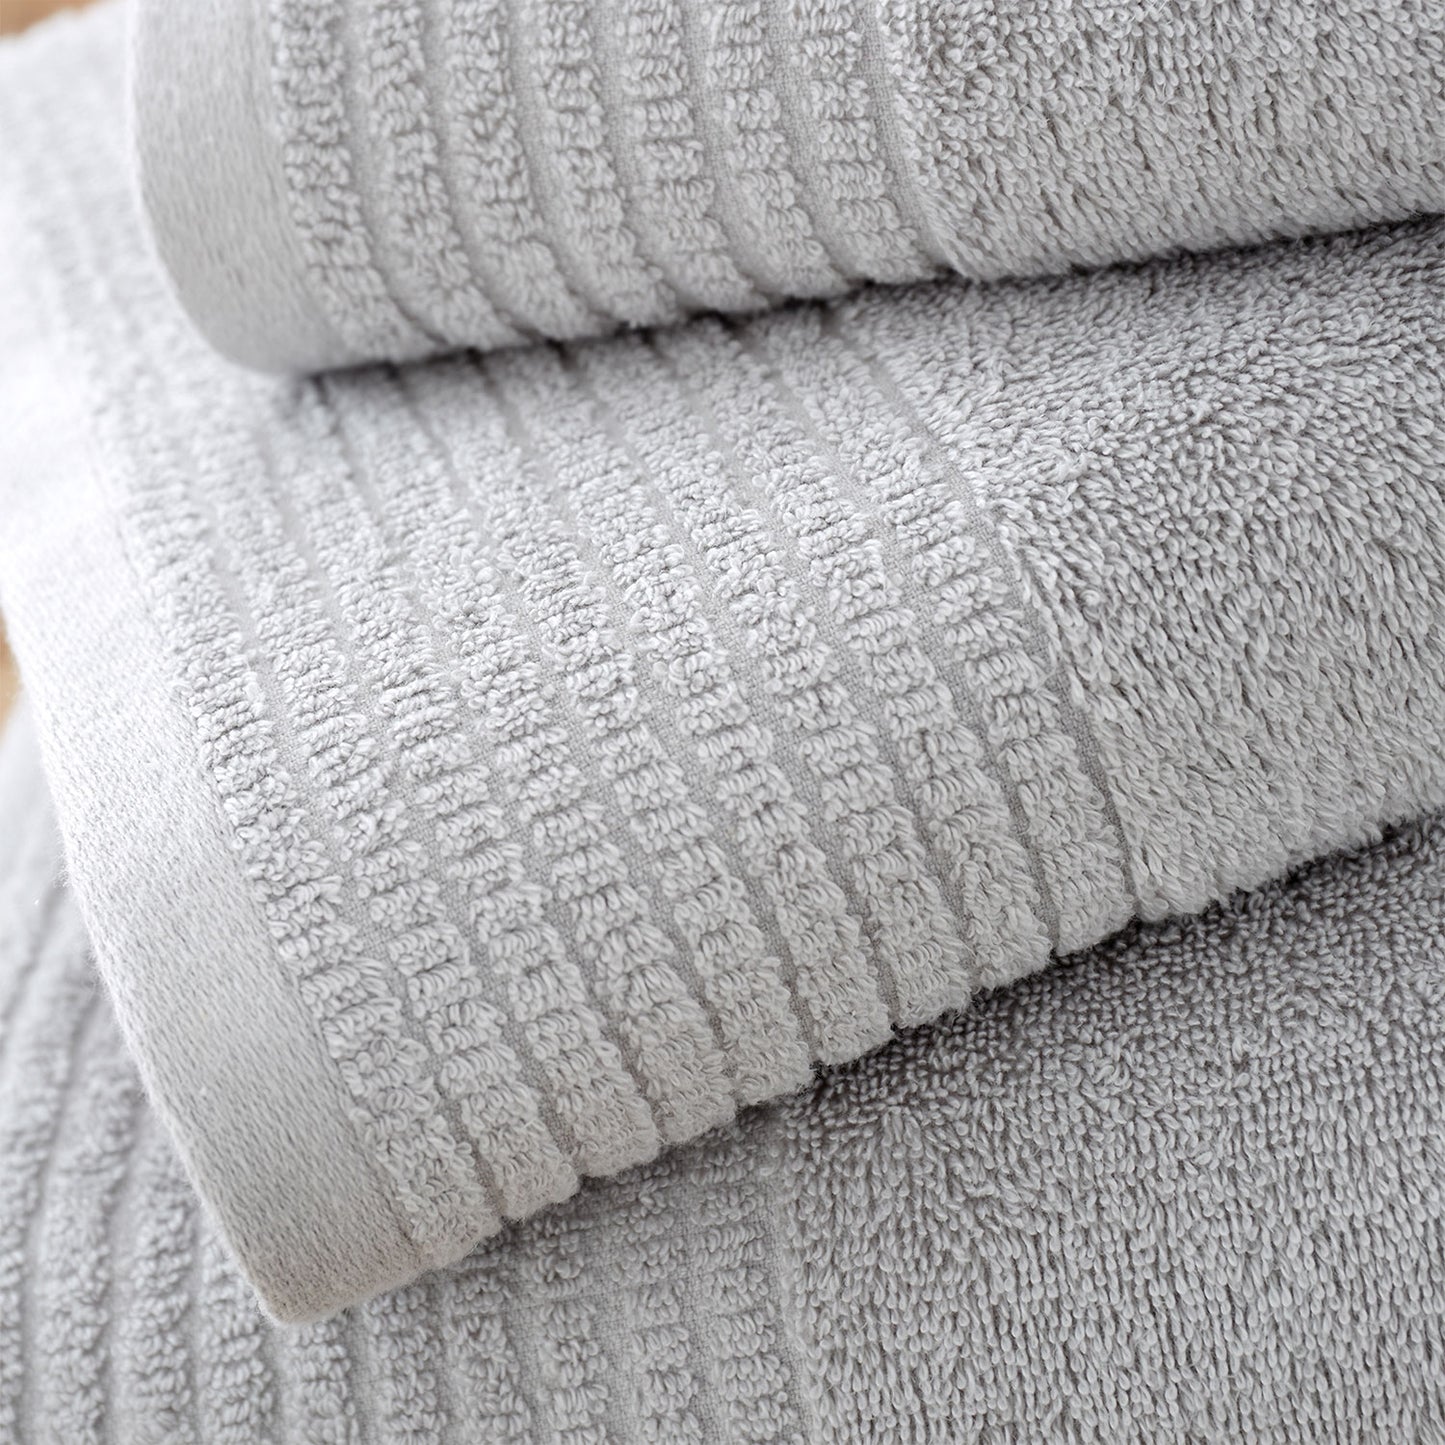 Bianca Silver Grey Egyptian Cotton Towels